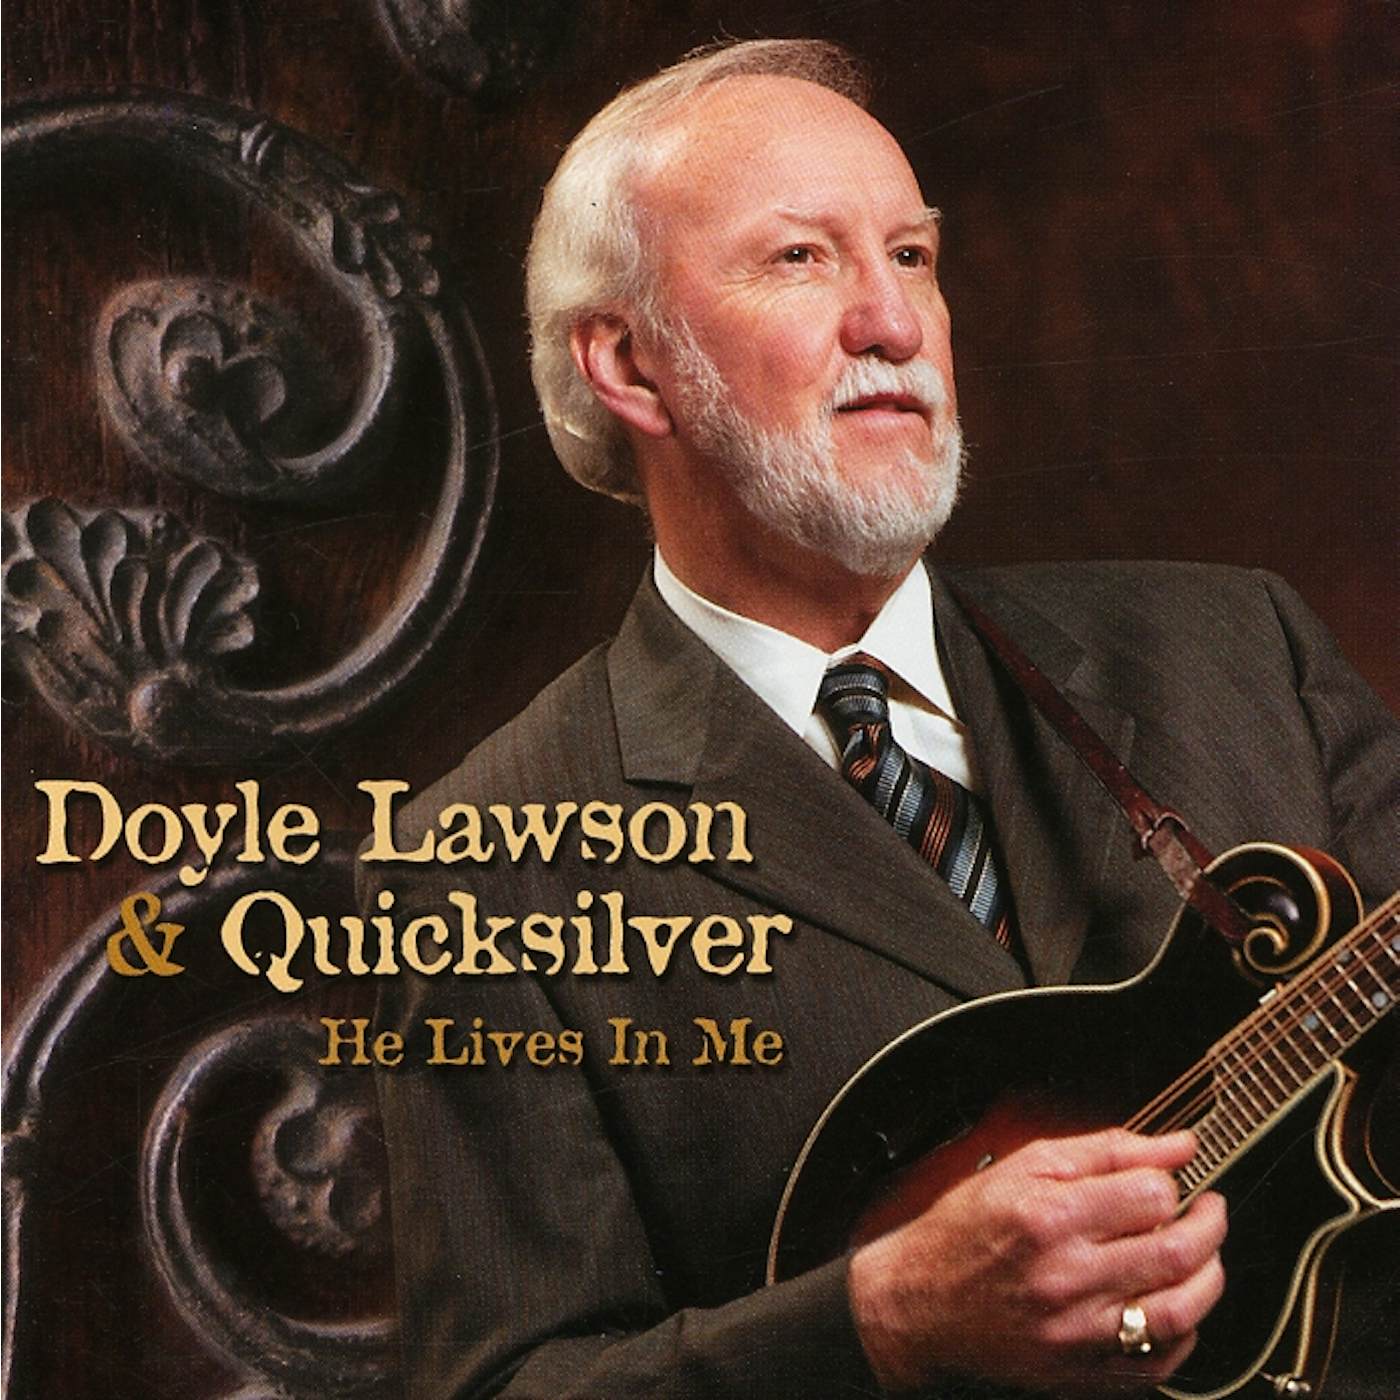 Doyle Lawson & Quicksilver HE LIVES IN ME CD